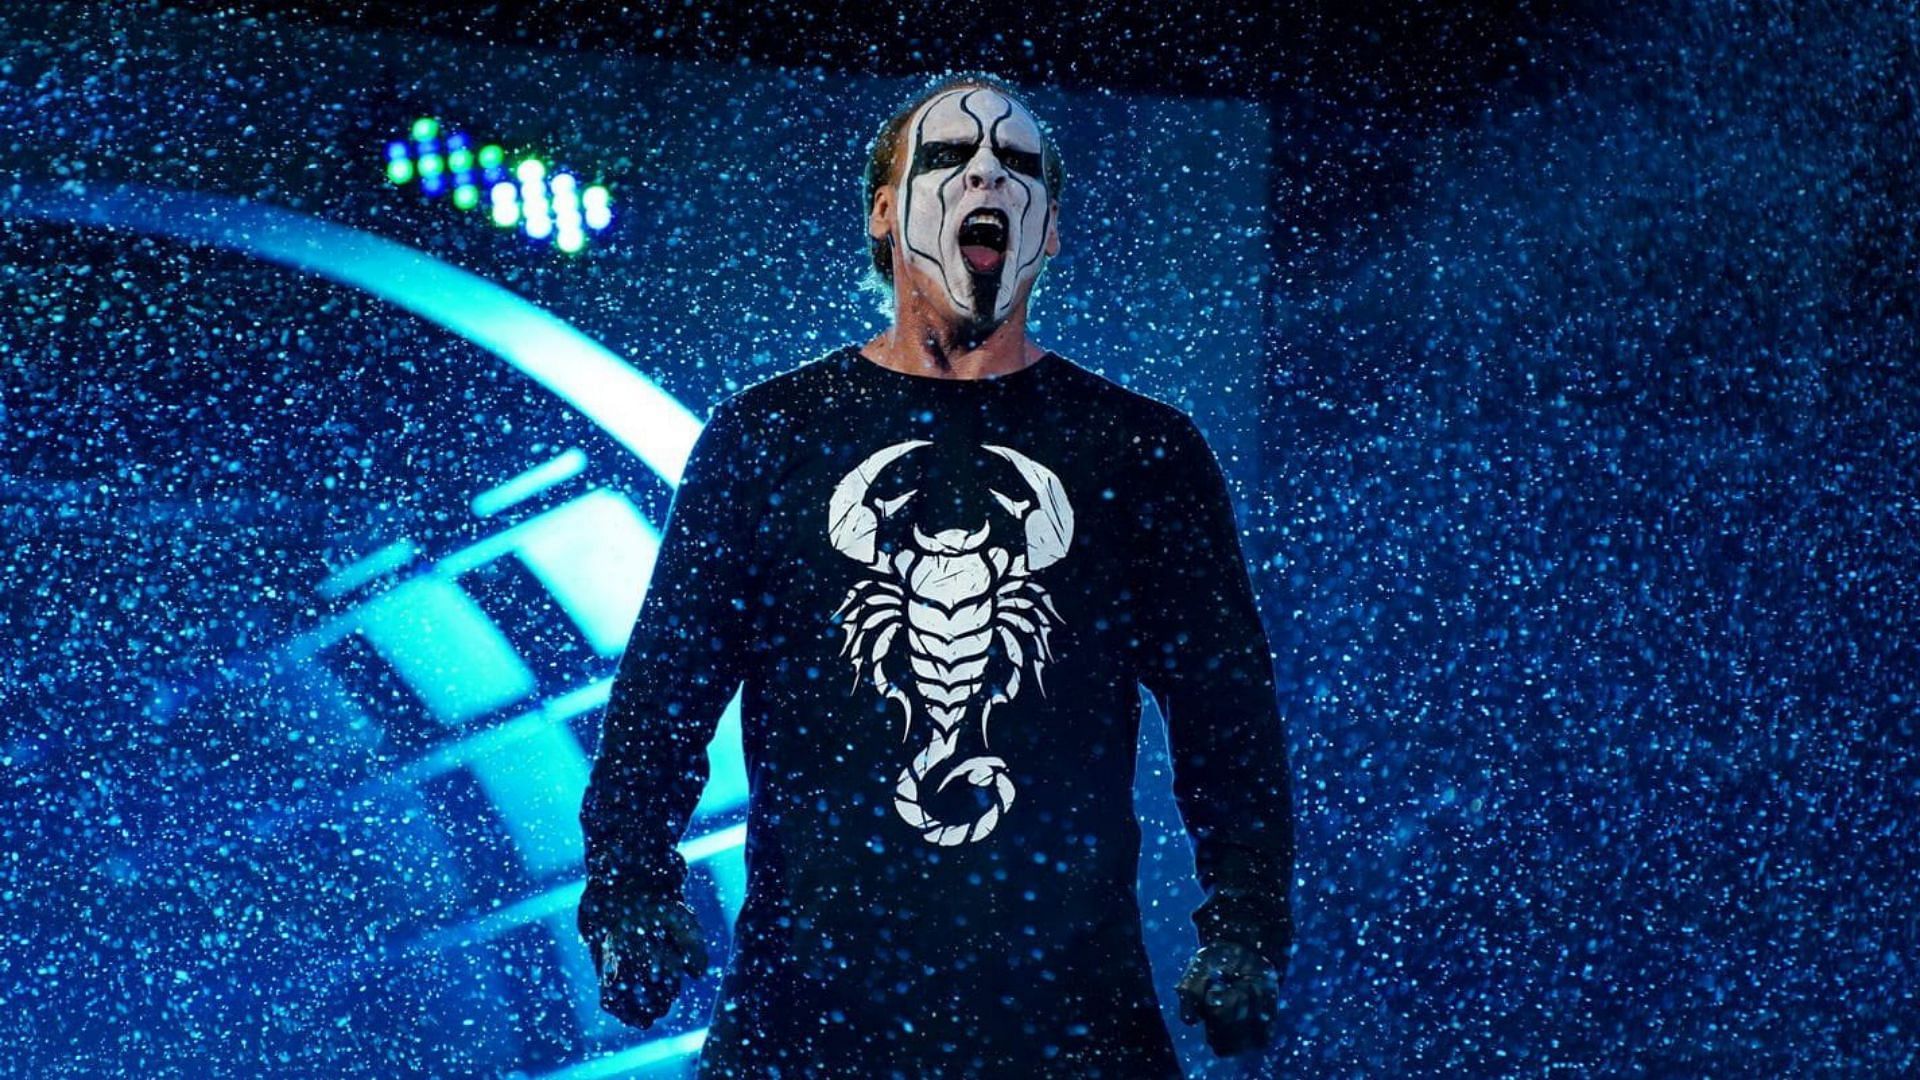 Sting has shared a message ahead of AEW Dynamite